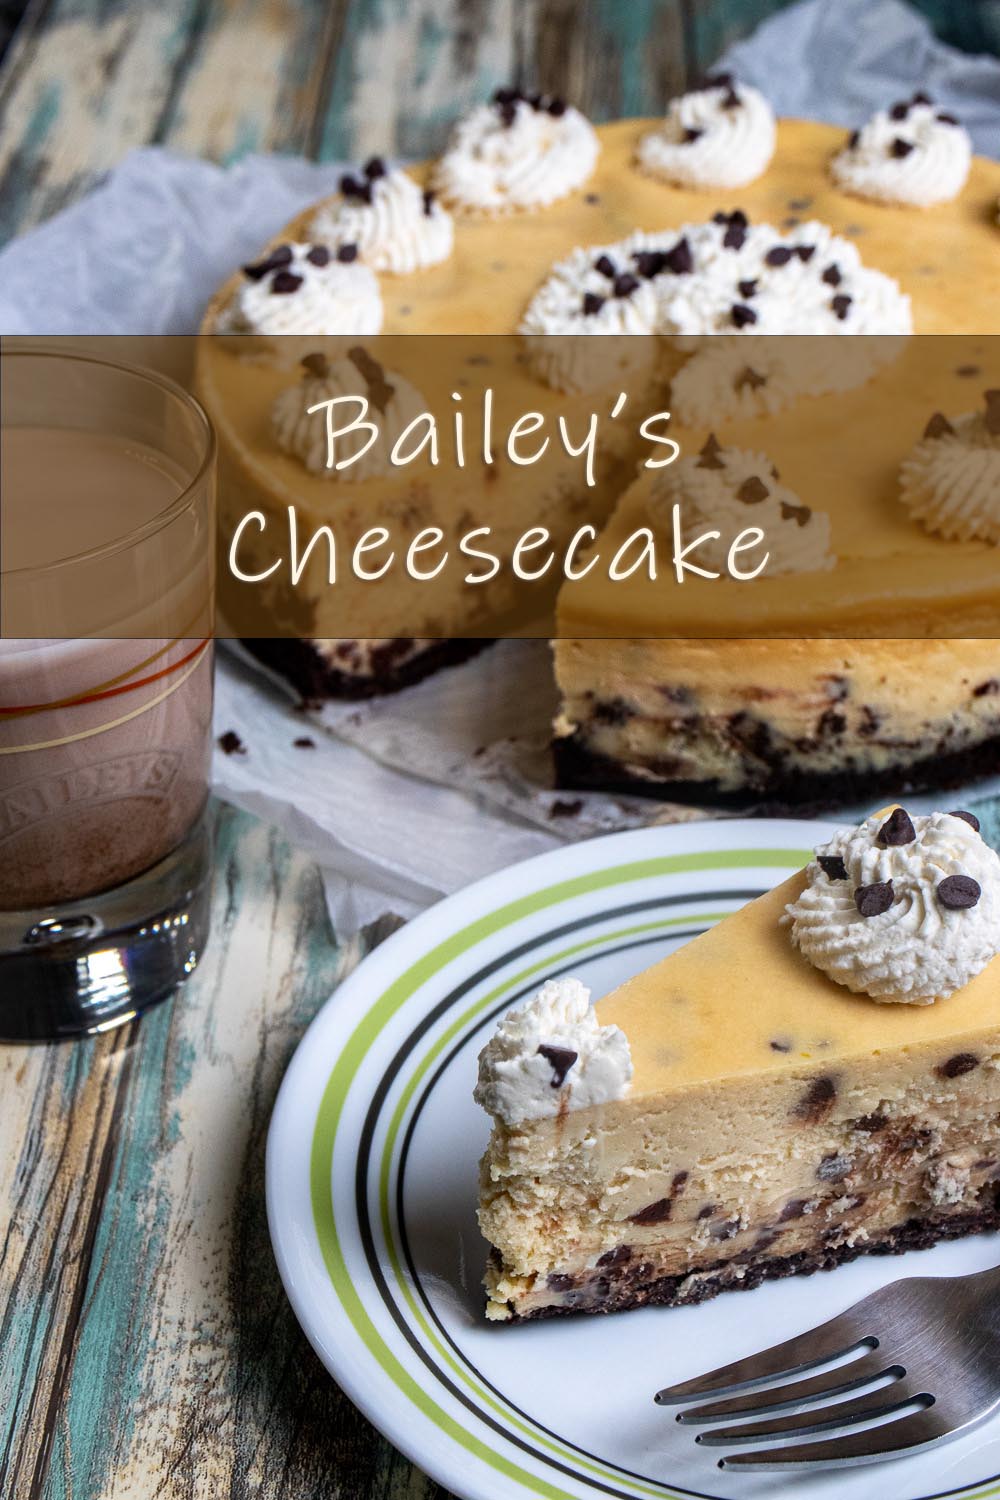 A slice of Bailey's cheesecake with chocolate chips and glass of Bailey's next to it.